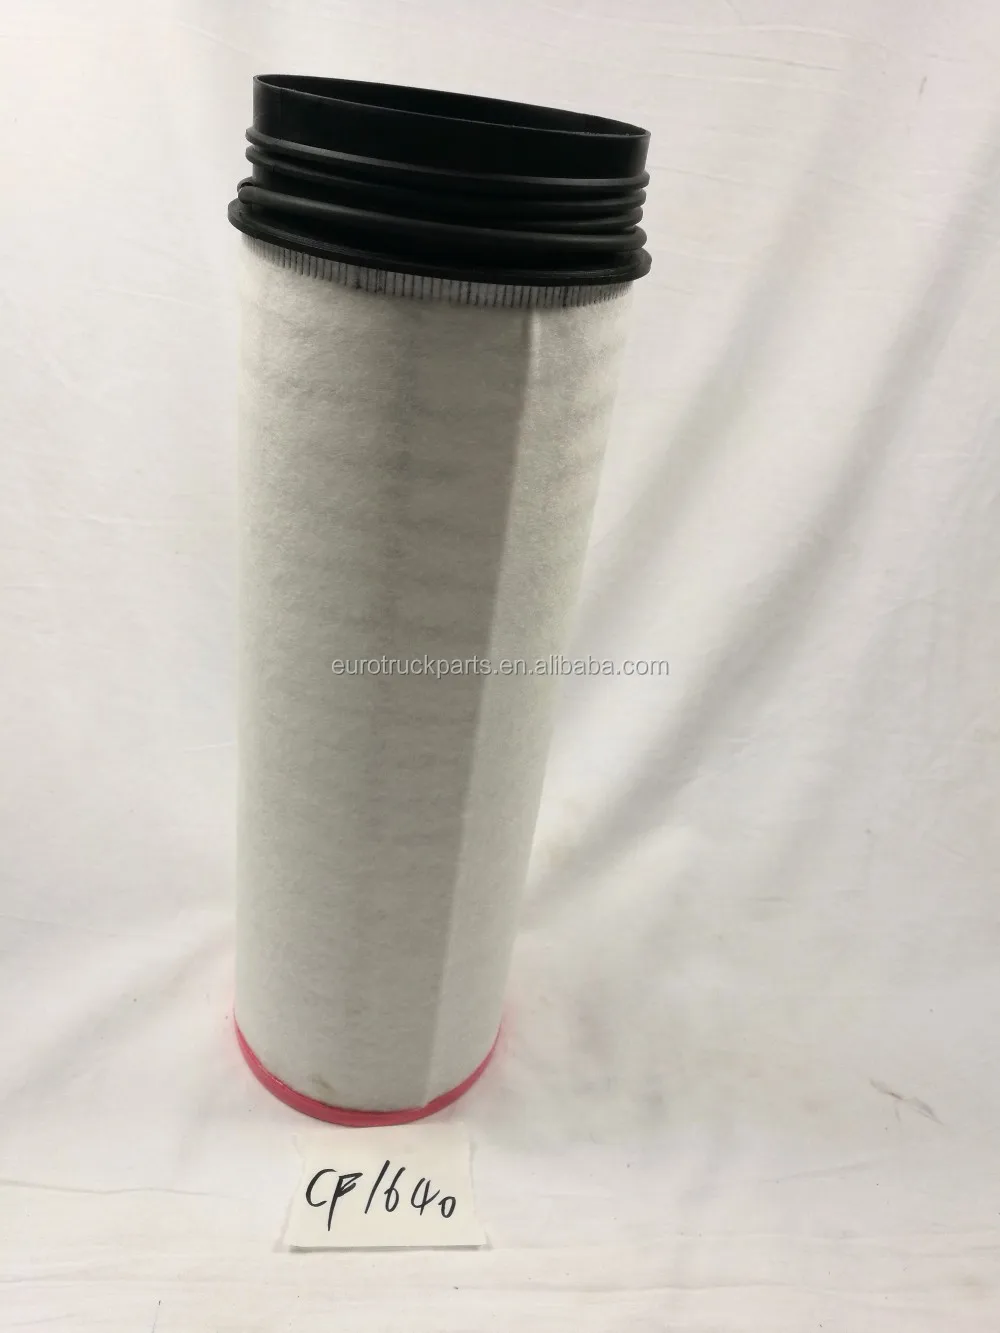 High quality air filter oem 81084050017 CF1640 for Man Tga heavy truck auto body parts (4).jpg